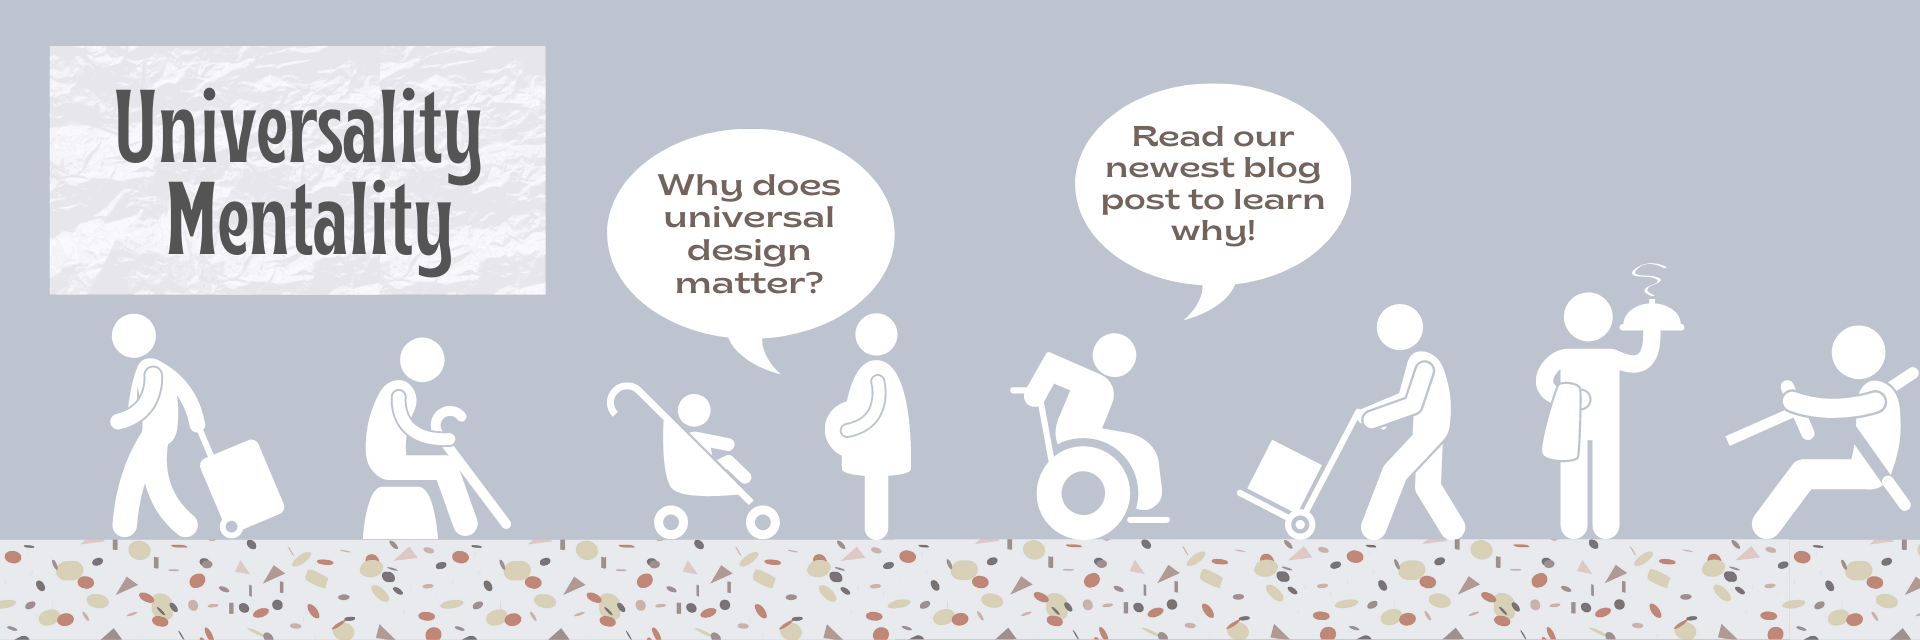 Text: Universality Mentality; Why does universal design matter? Read our newest blog post to learn why! Graphic: icons of all the people universal design serves including mothers with strollers, delivery people, drivers, disabled individuals, wheelchair users, and more!